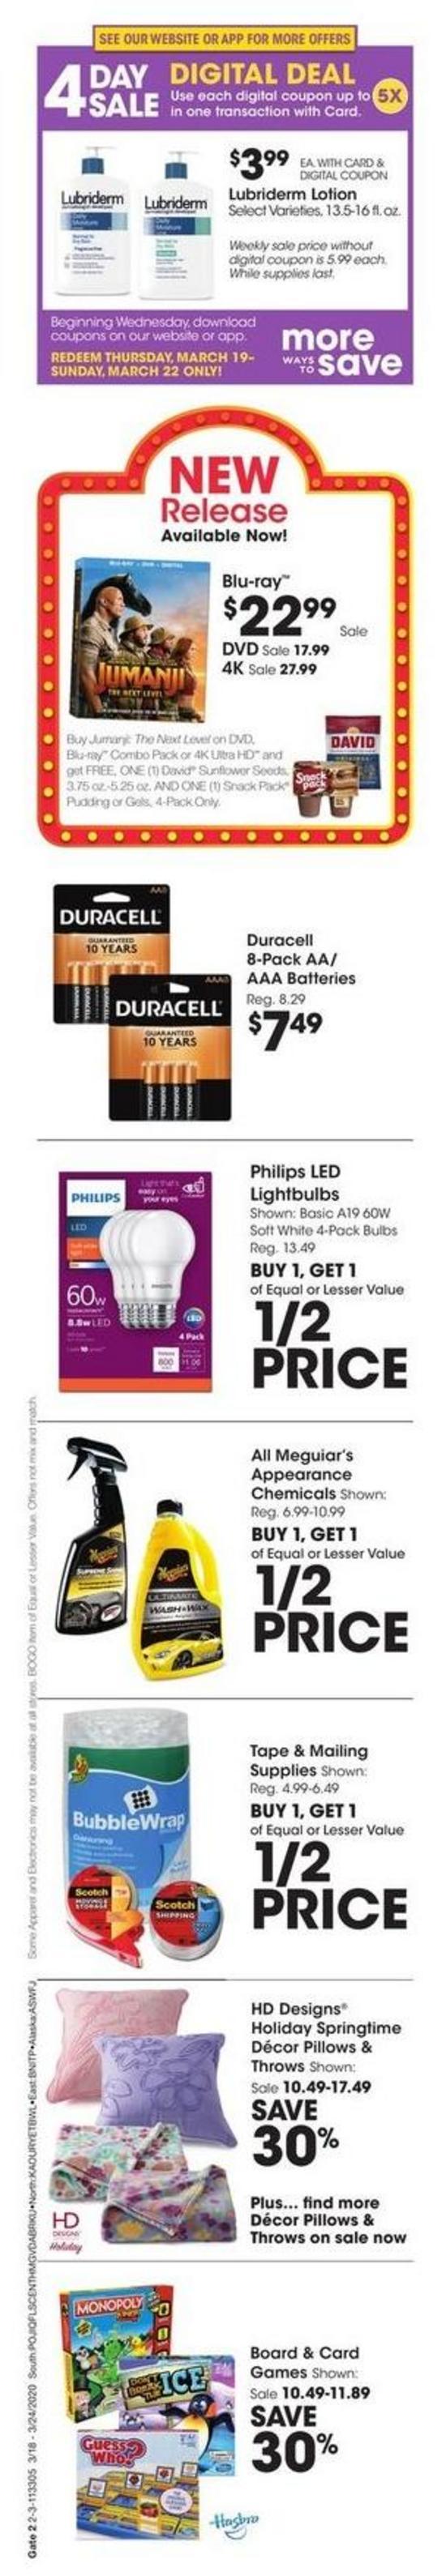 Fred Meyer Weekly Ad from March 18